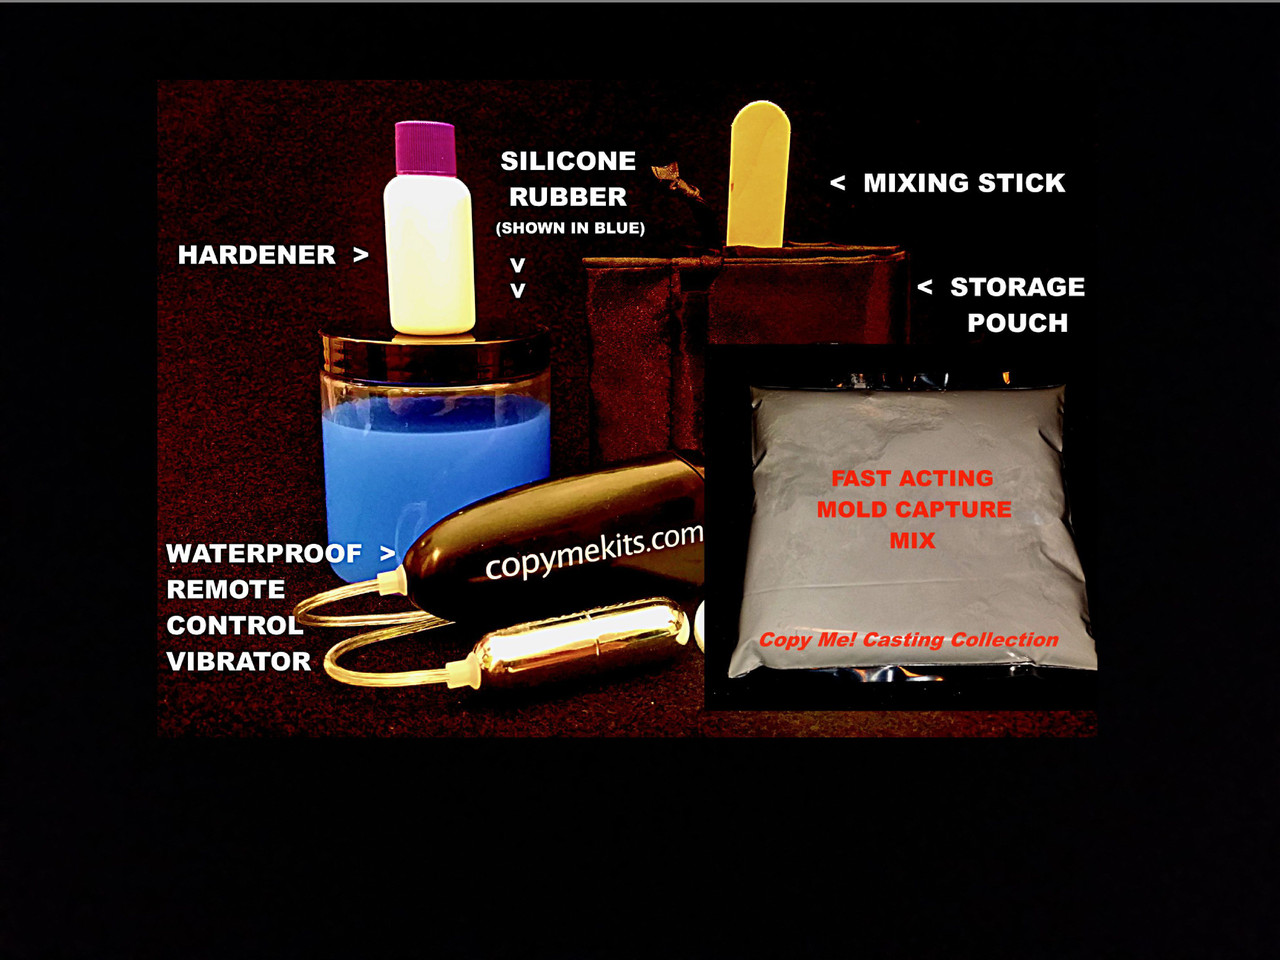 Copy Me Penis Casting Ultra Kits 1 In Home Molding System Patented Vibrating Dildo Duplicate